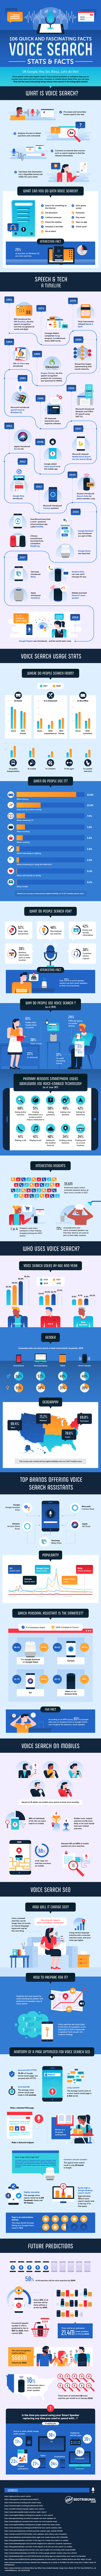 infographic voice search